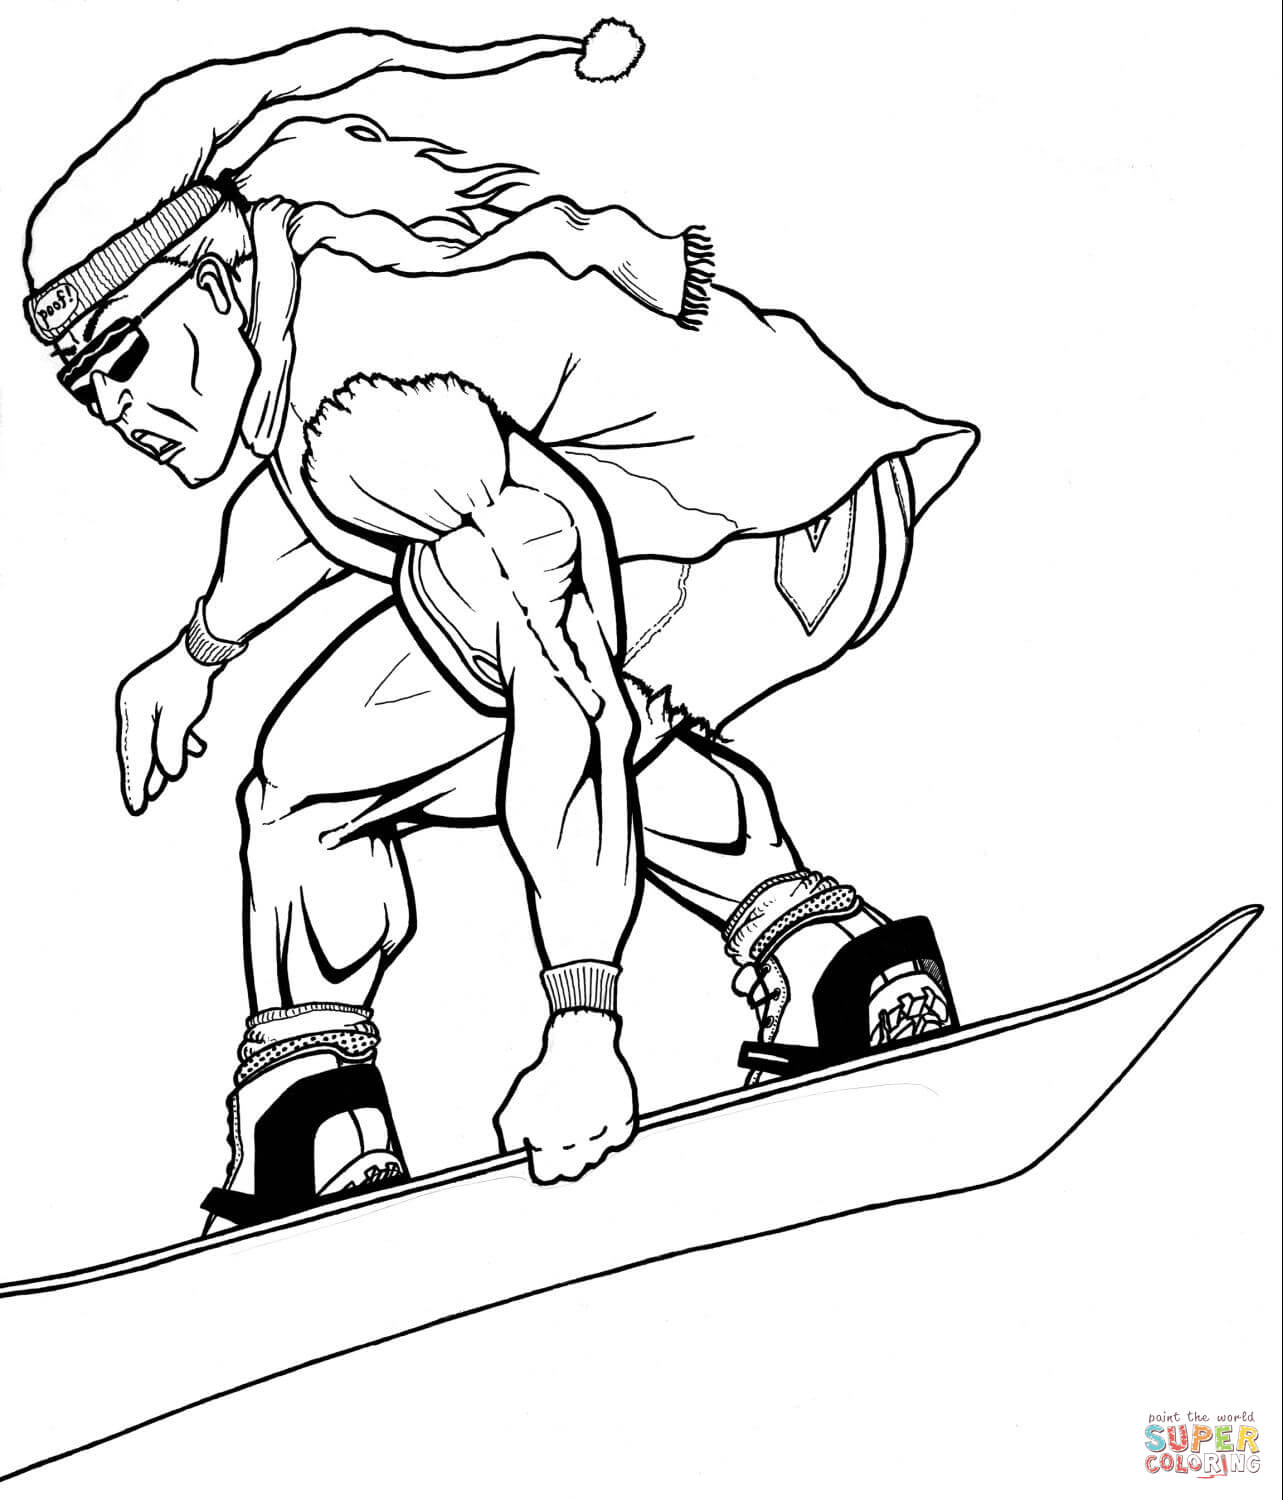 Muscular Snowboarder coloring page | Free Printable Coloring Pages